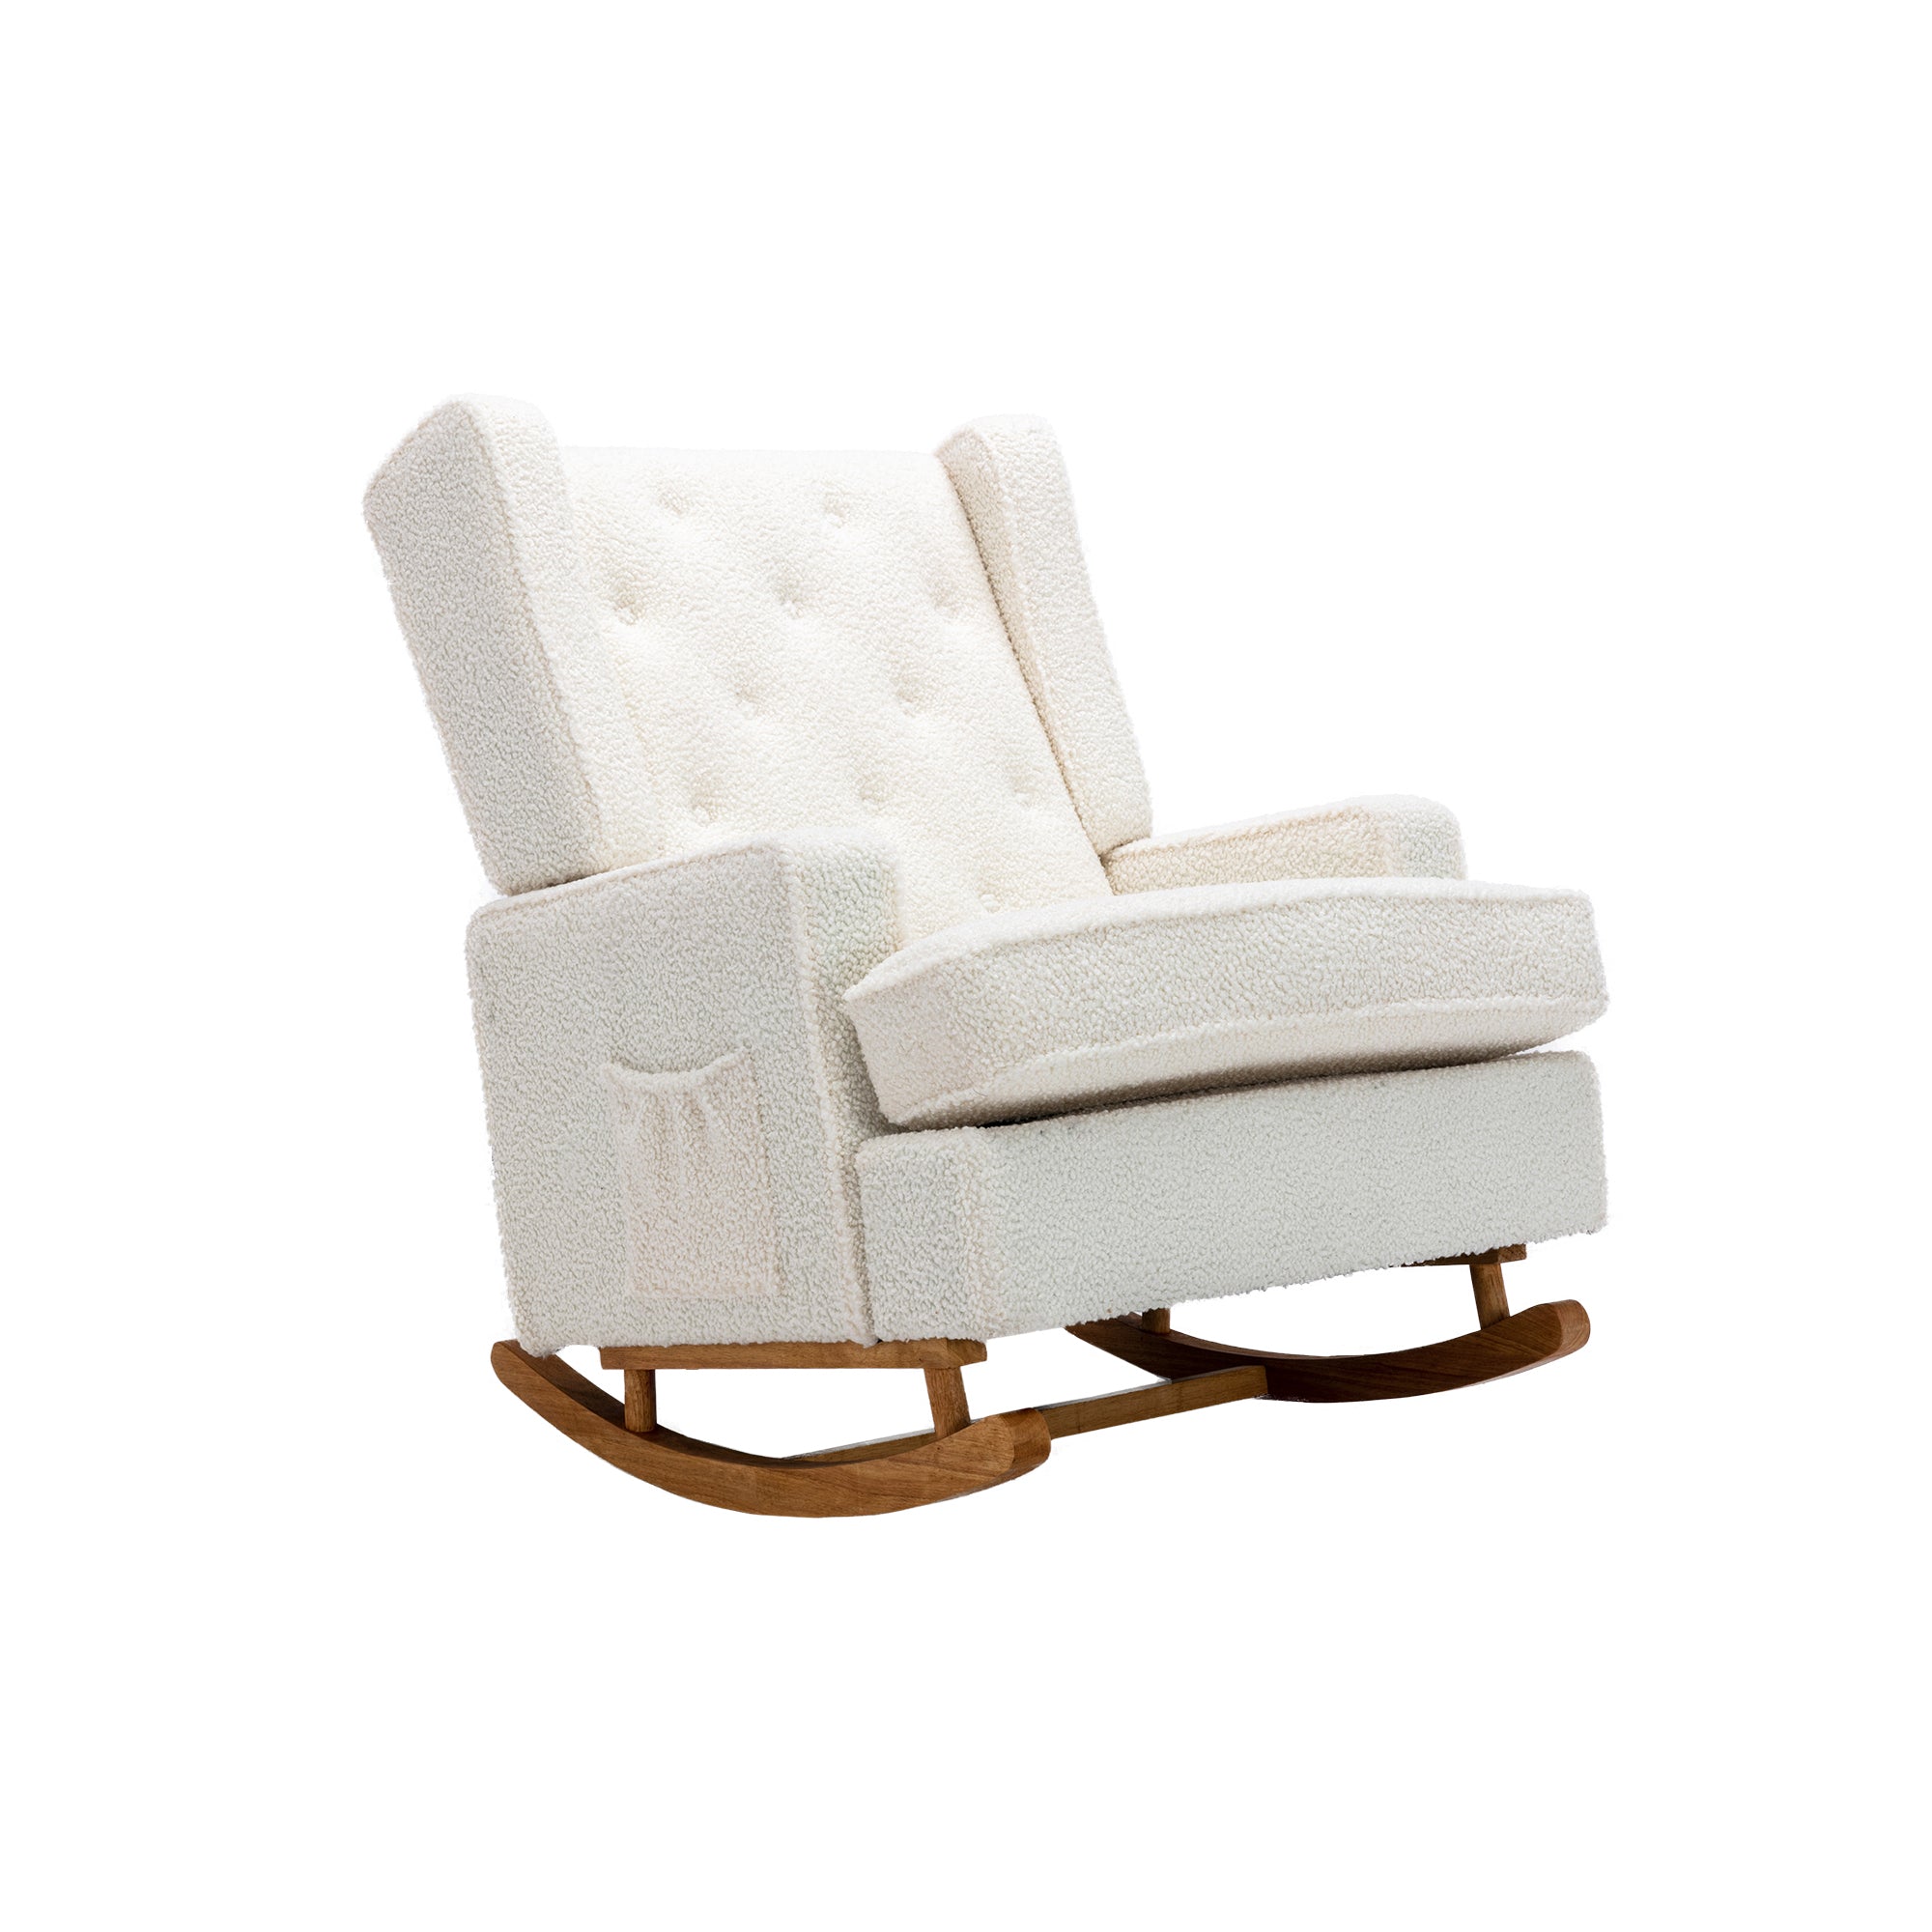 Comfortable Teddy Rocking Chair - White